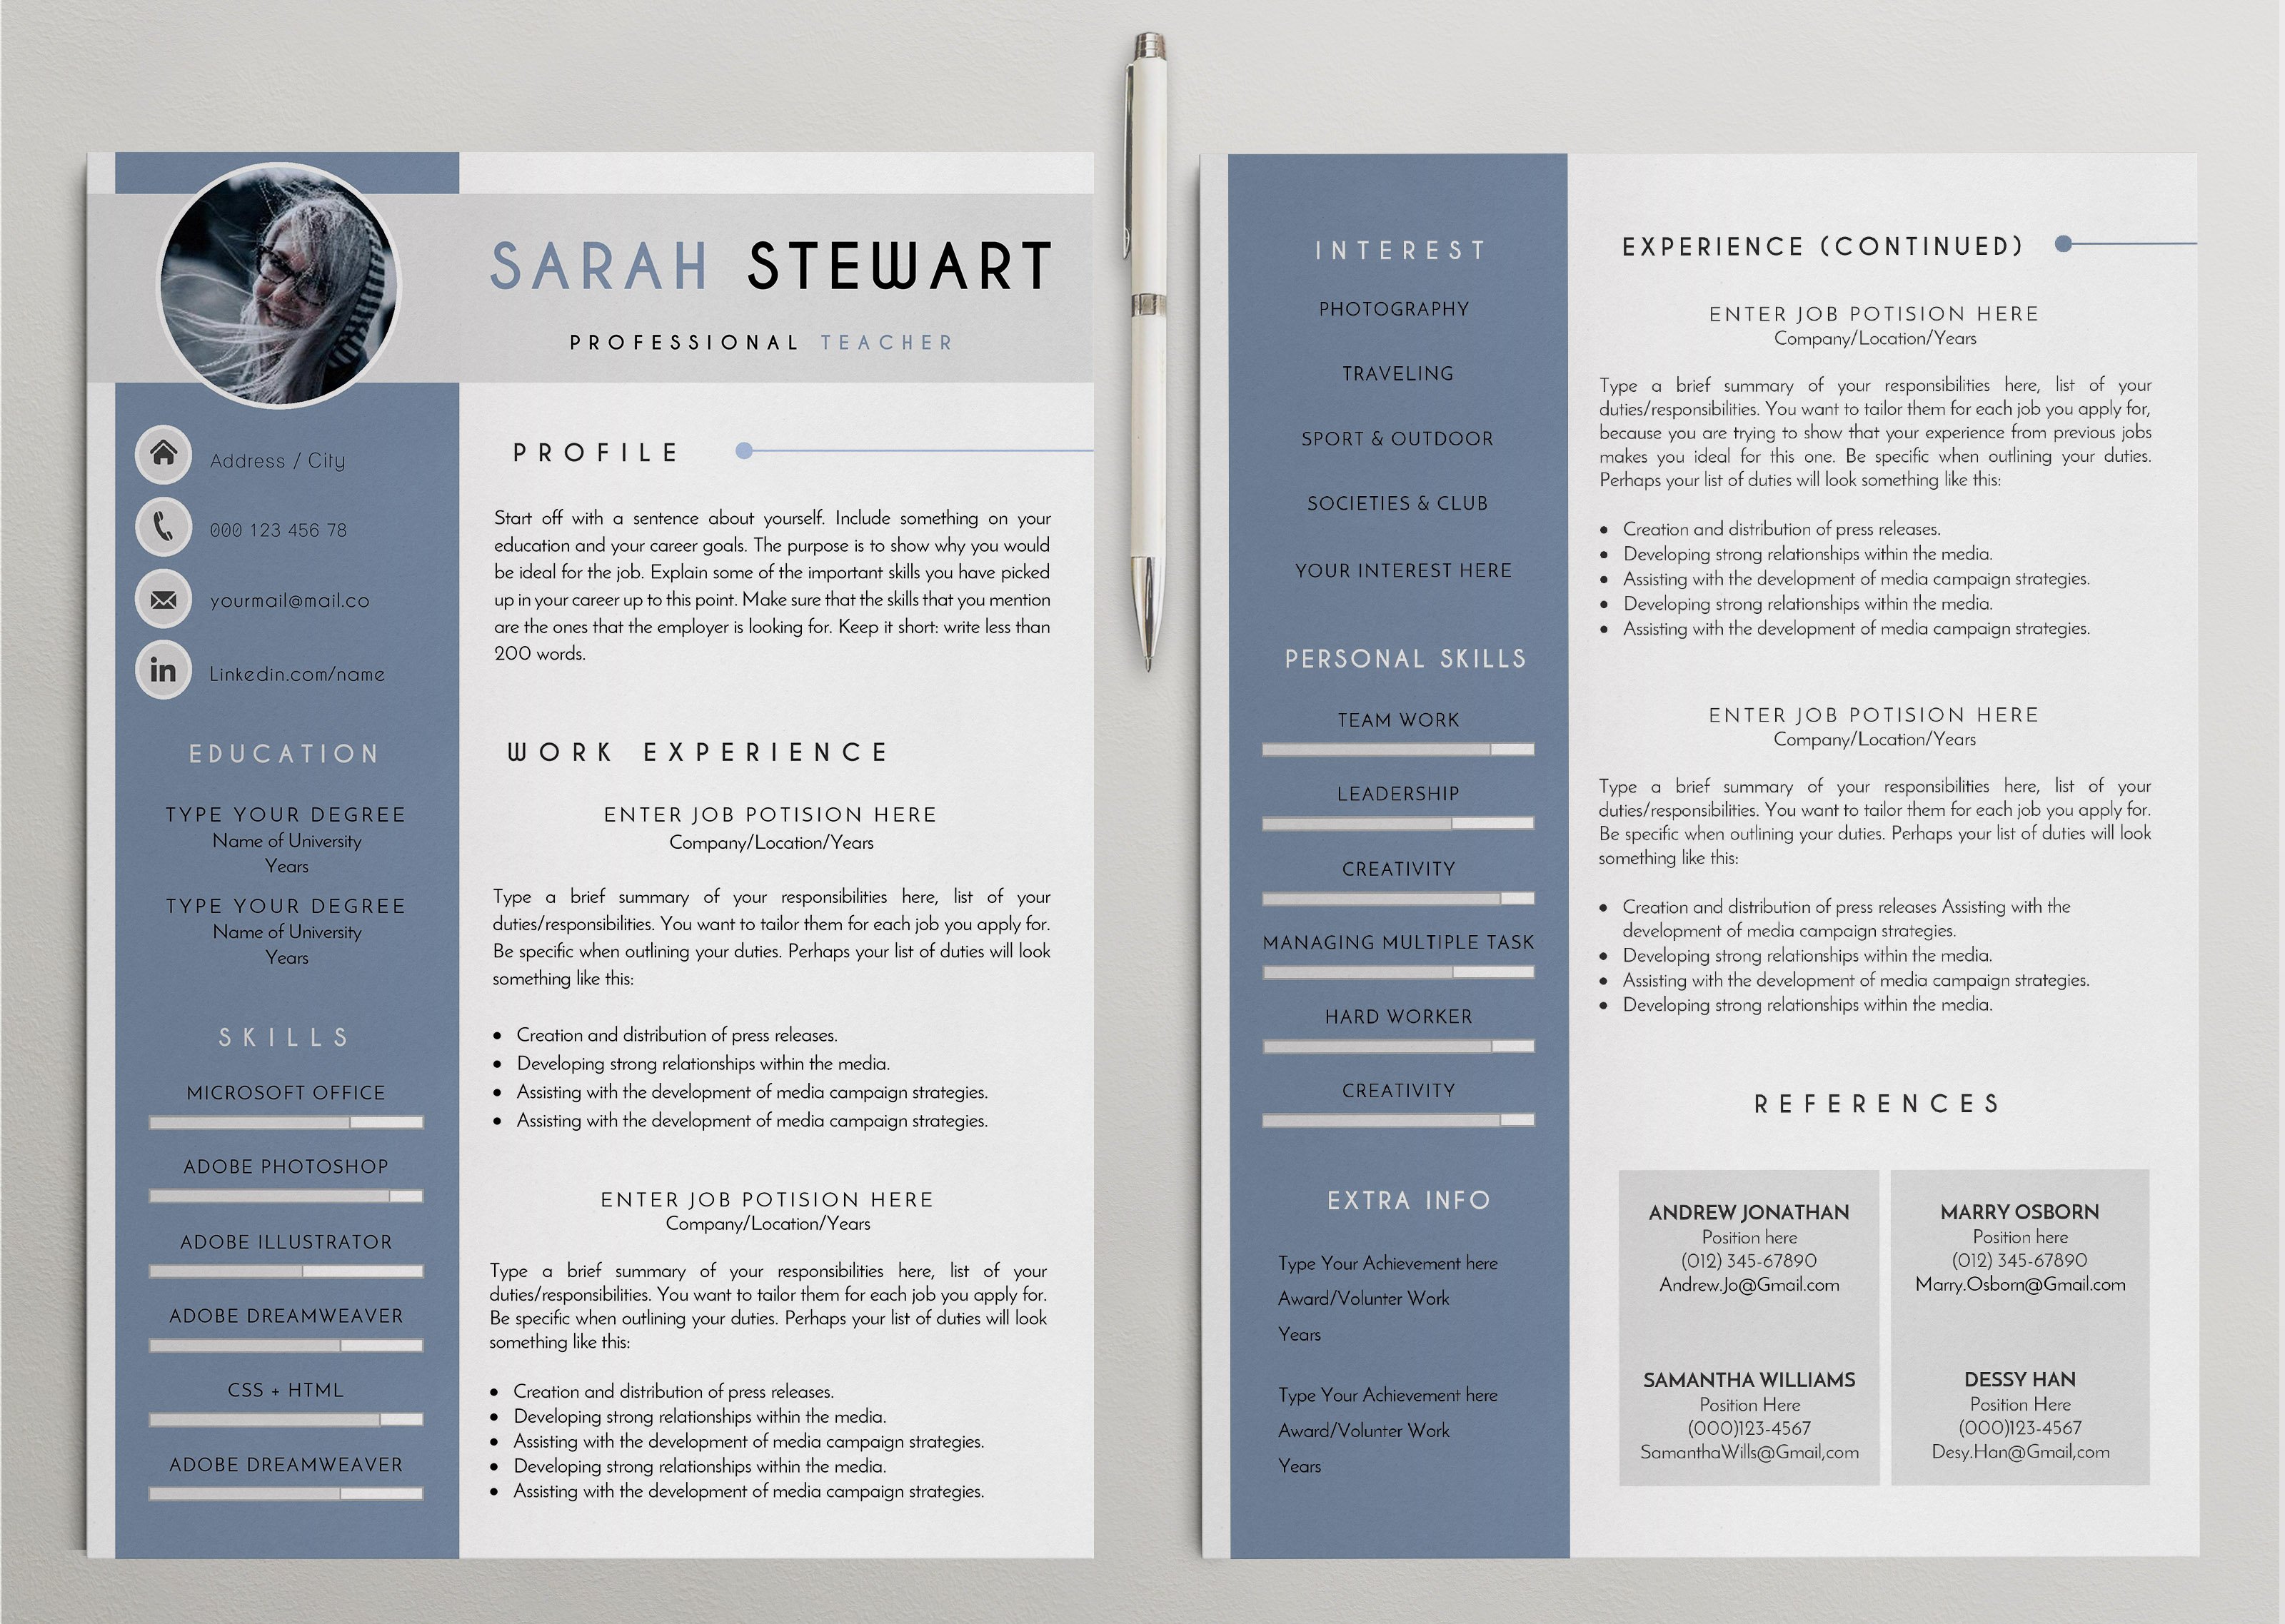 Profesional Resume Templates preview image.